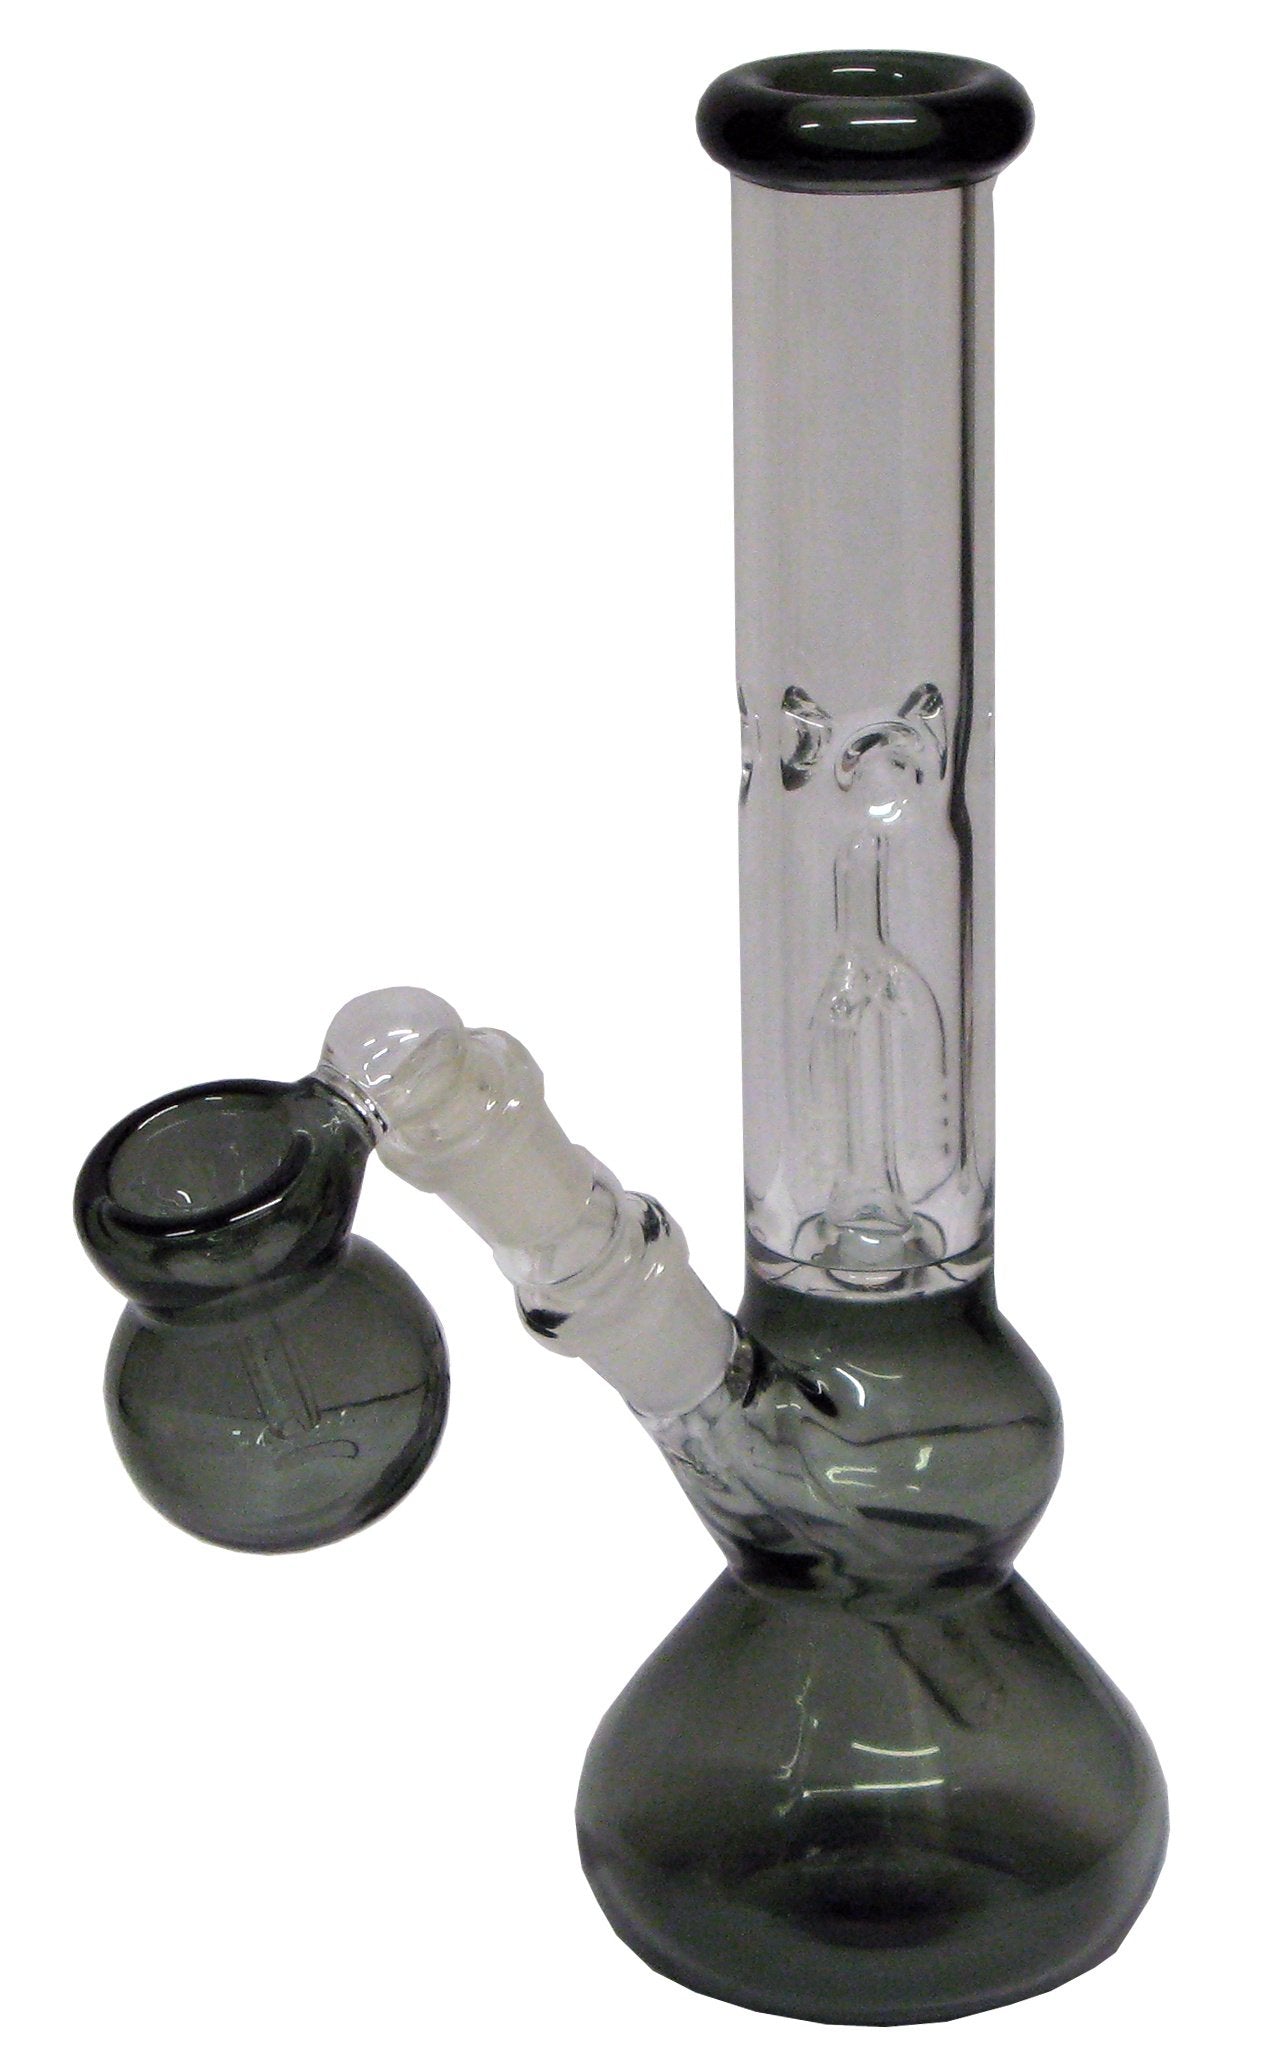 Spare Blue-Grey Bowl for XGB32 (fits all 14.5mm joints)